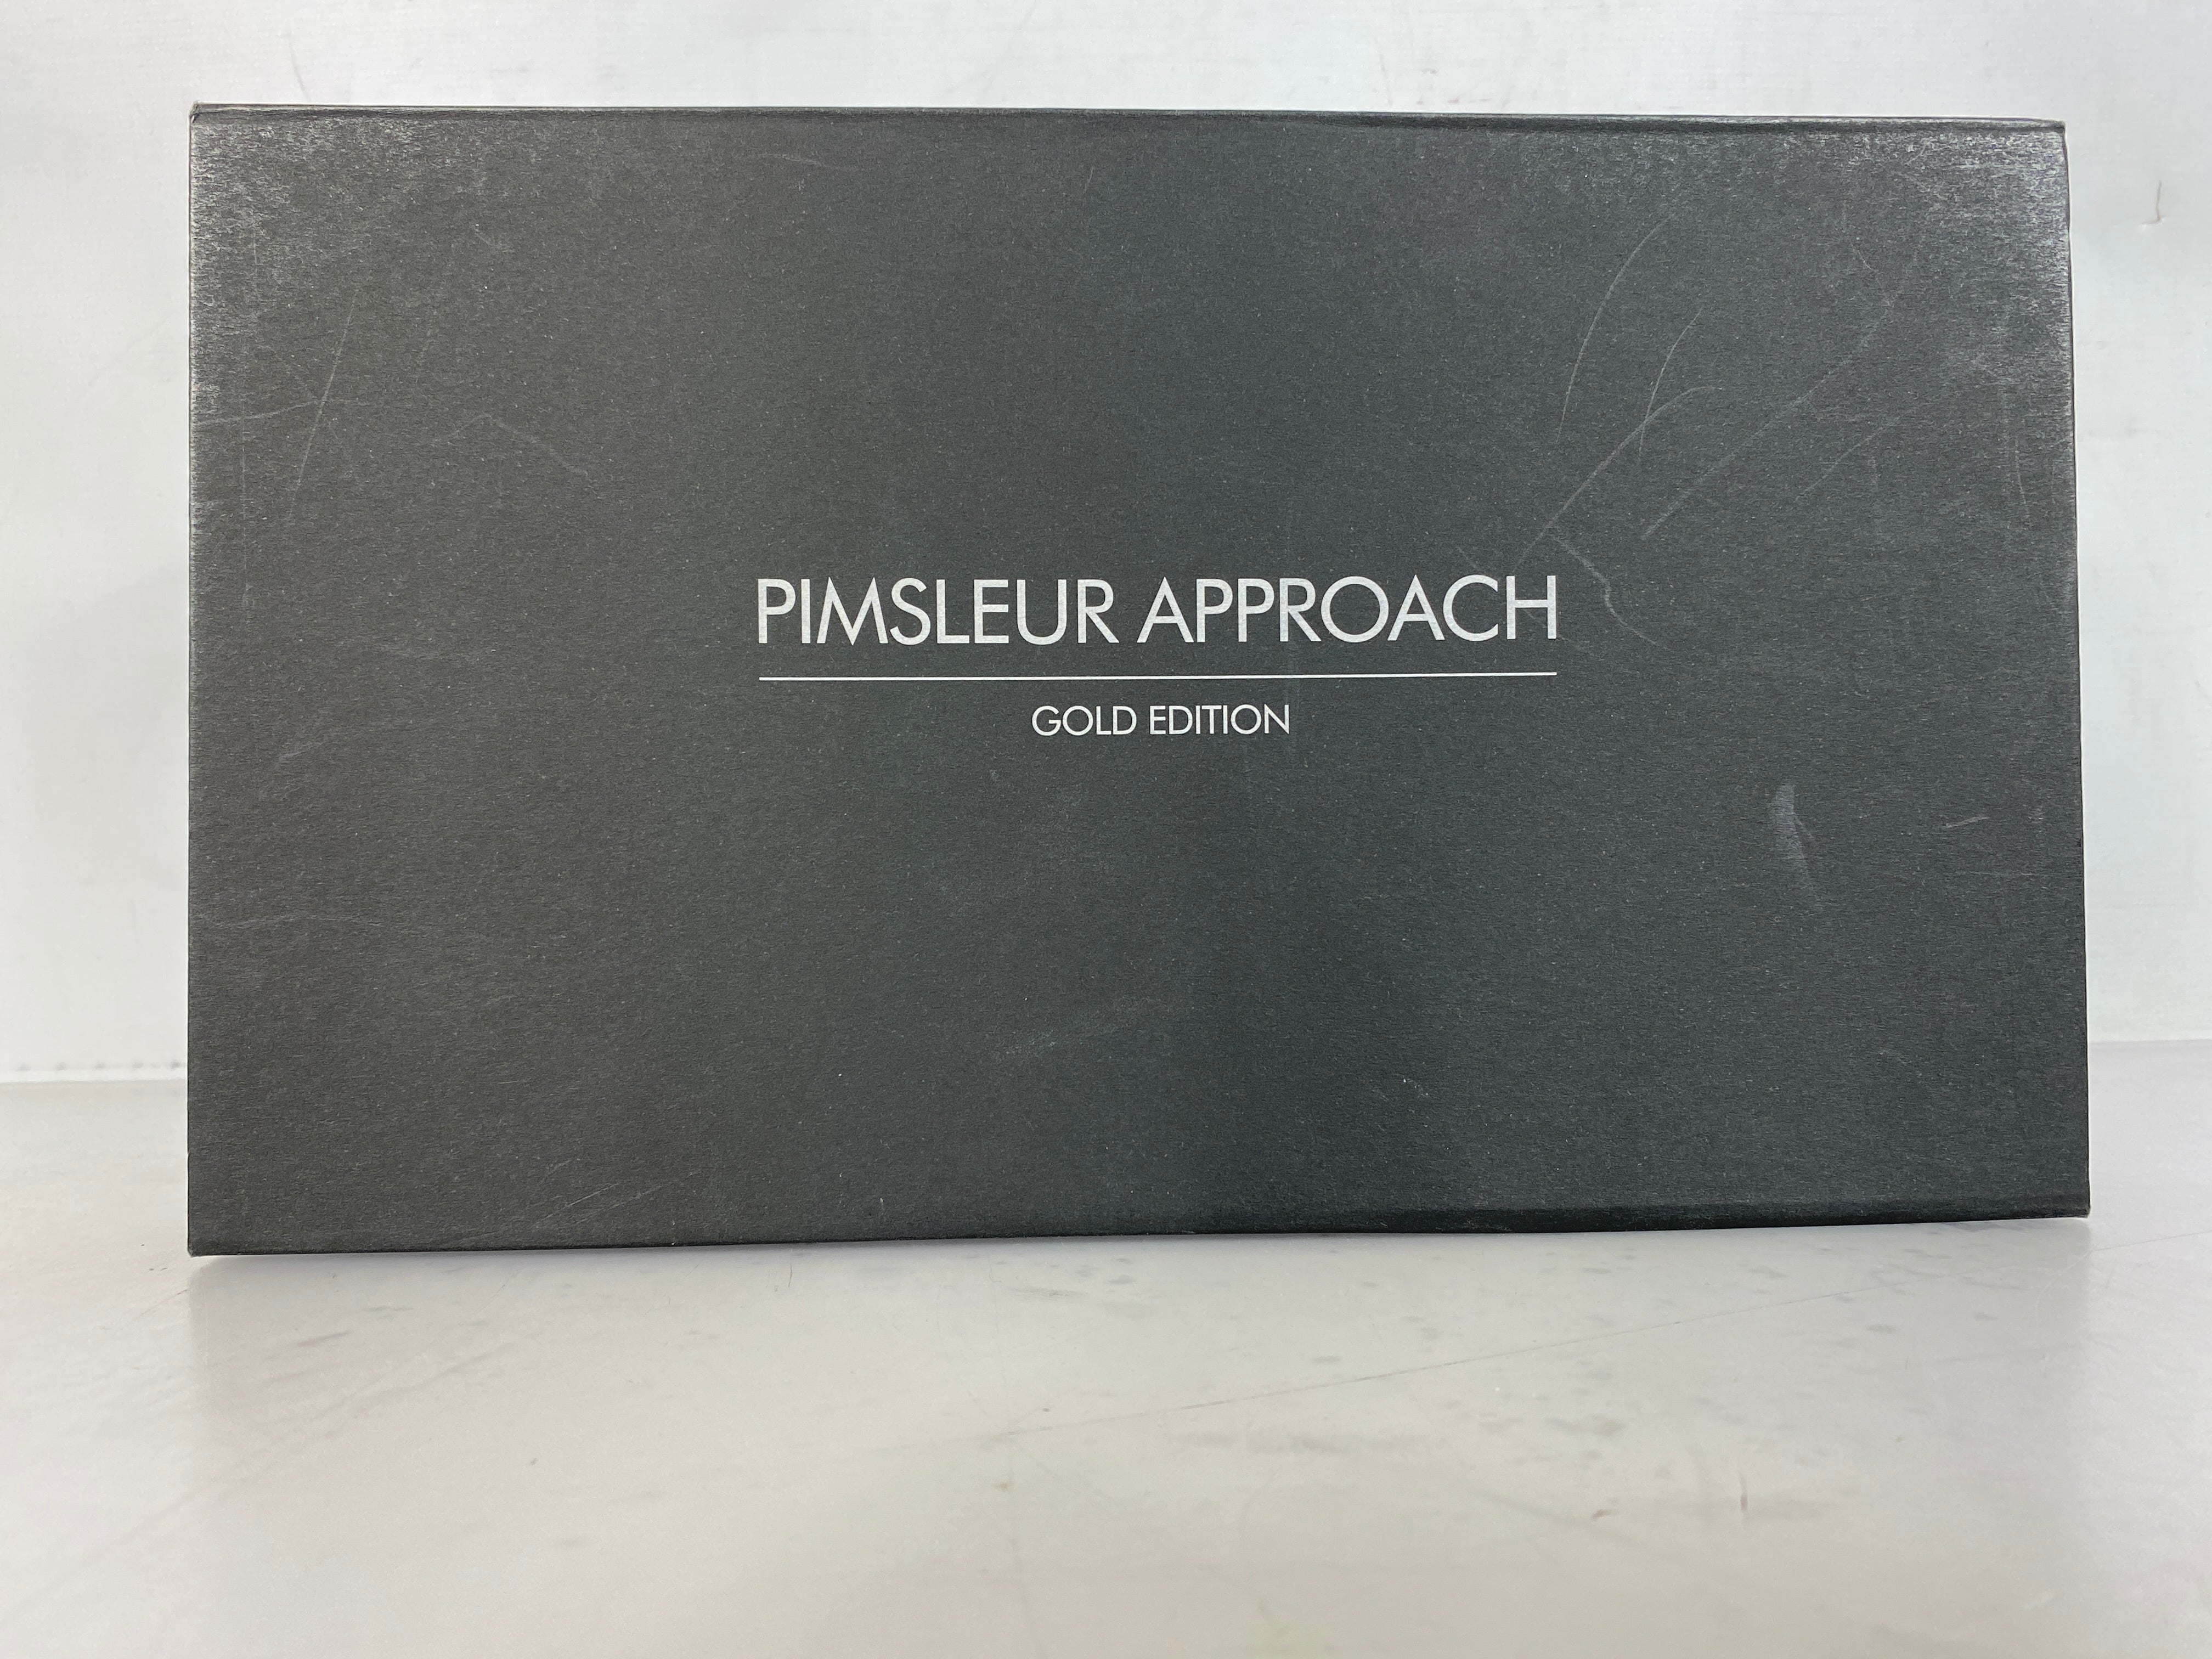 4 Volume Set Pimsleur Approach Gold Edition French (1-4) 64 CDs Second Edition